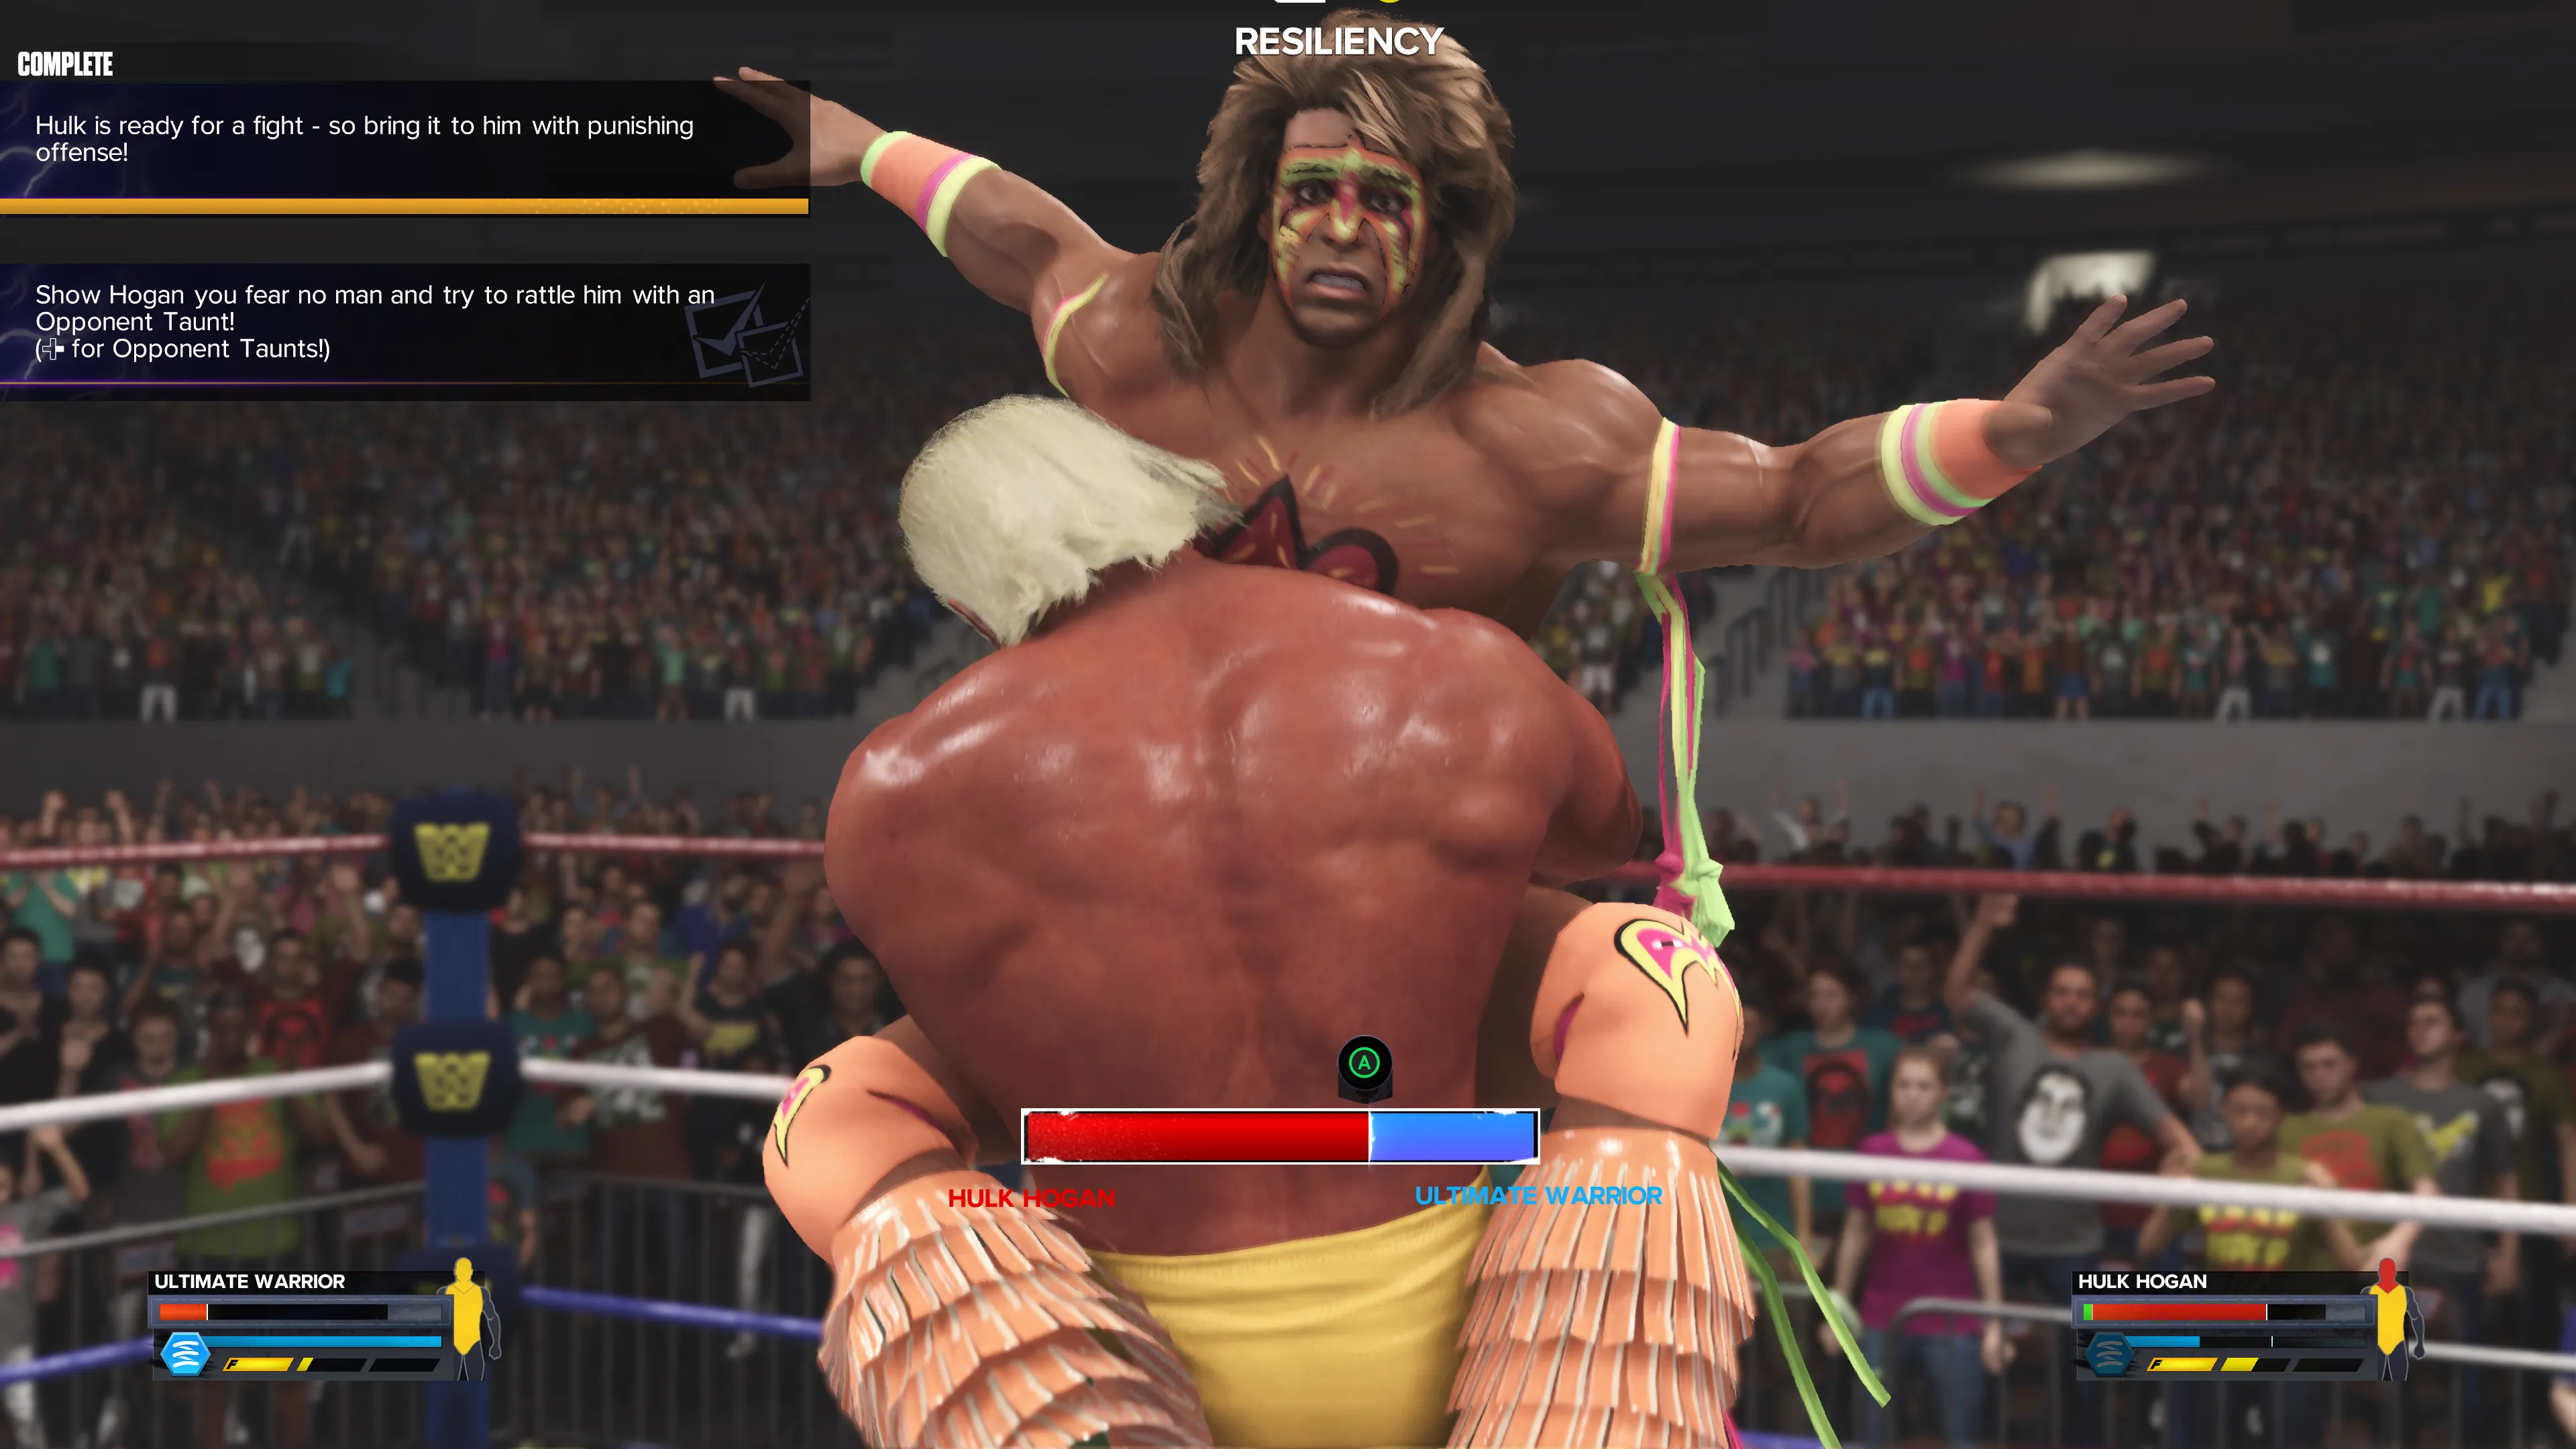 Hulk Hogan holds The Ultimate Warrior in a submission move